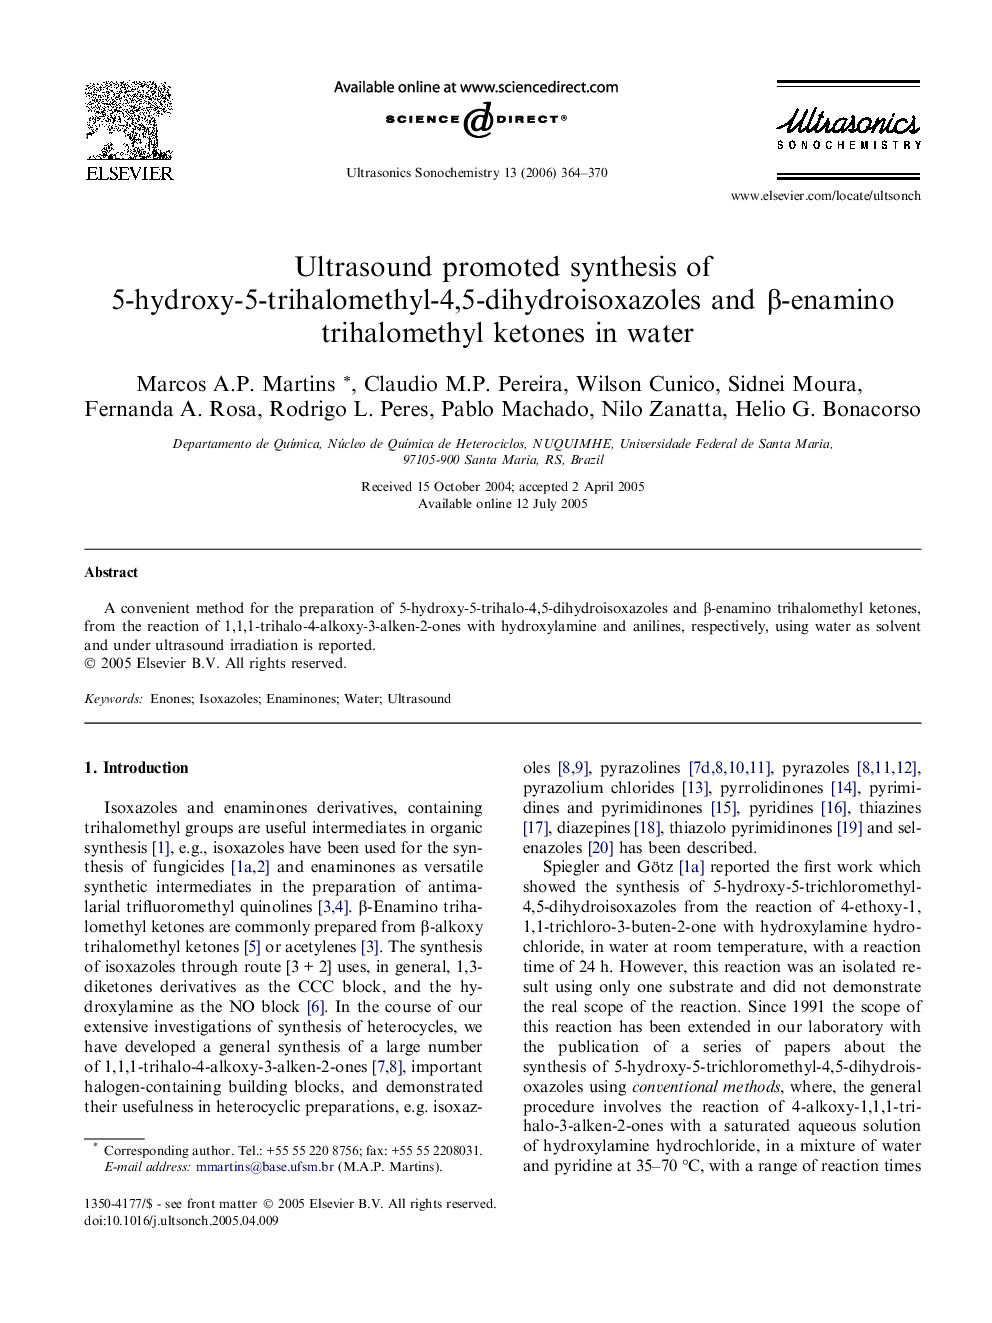 Ultrasound promoted synthesis of 5-hydroxy-5-trihalomethyl-4,5-dihydroisoxazoles and β-enamino trihalomethyl ketones in water